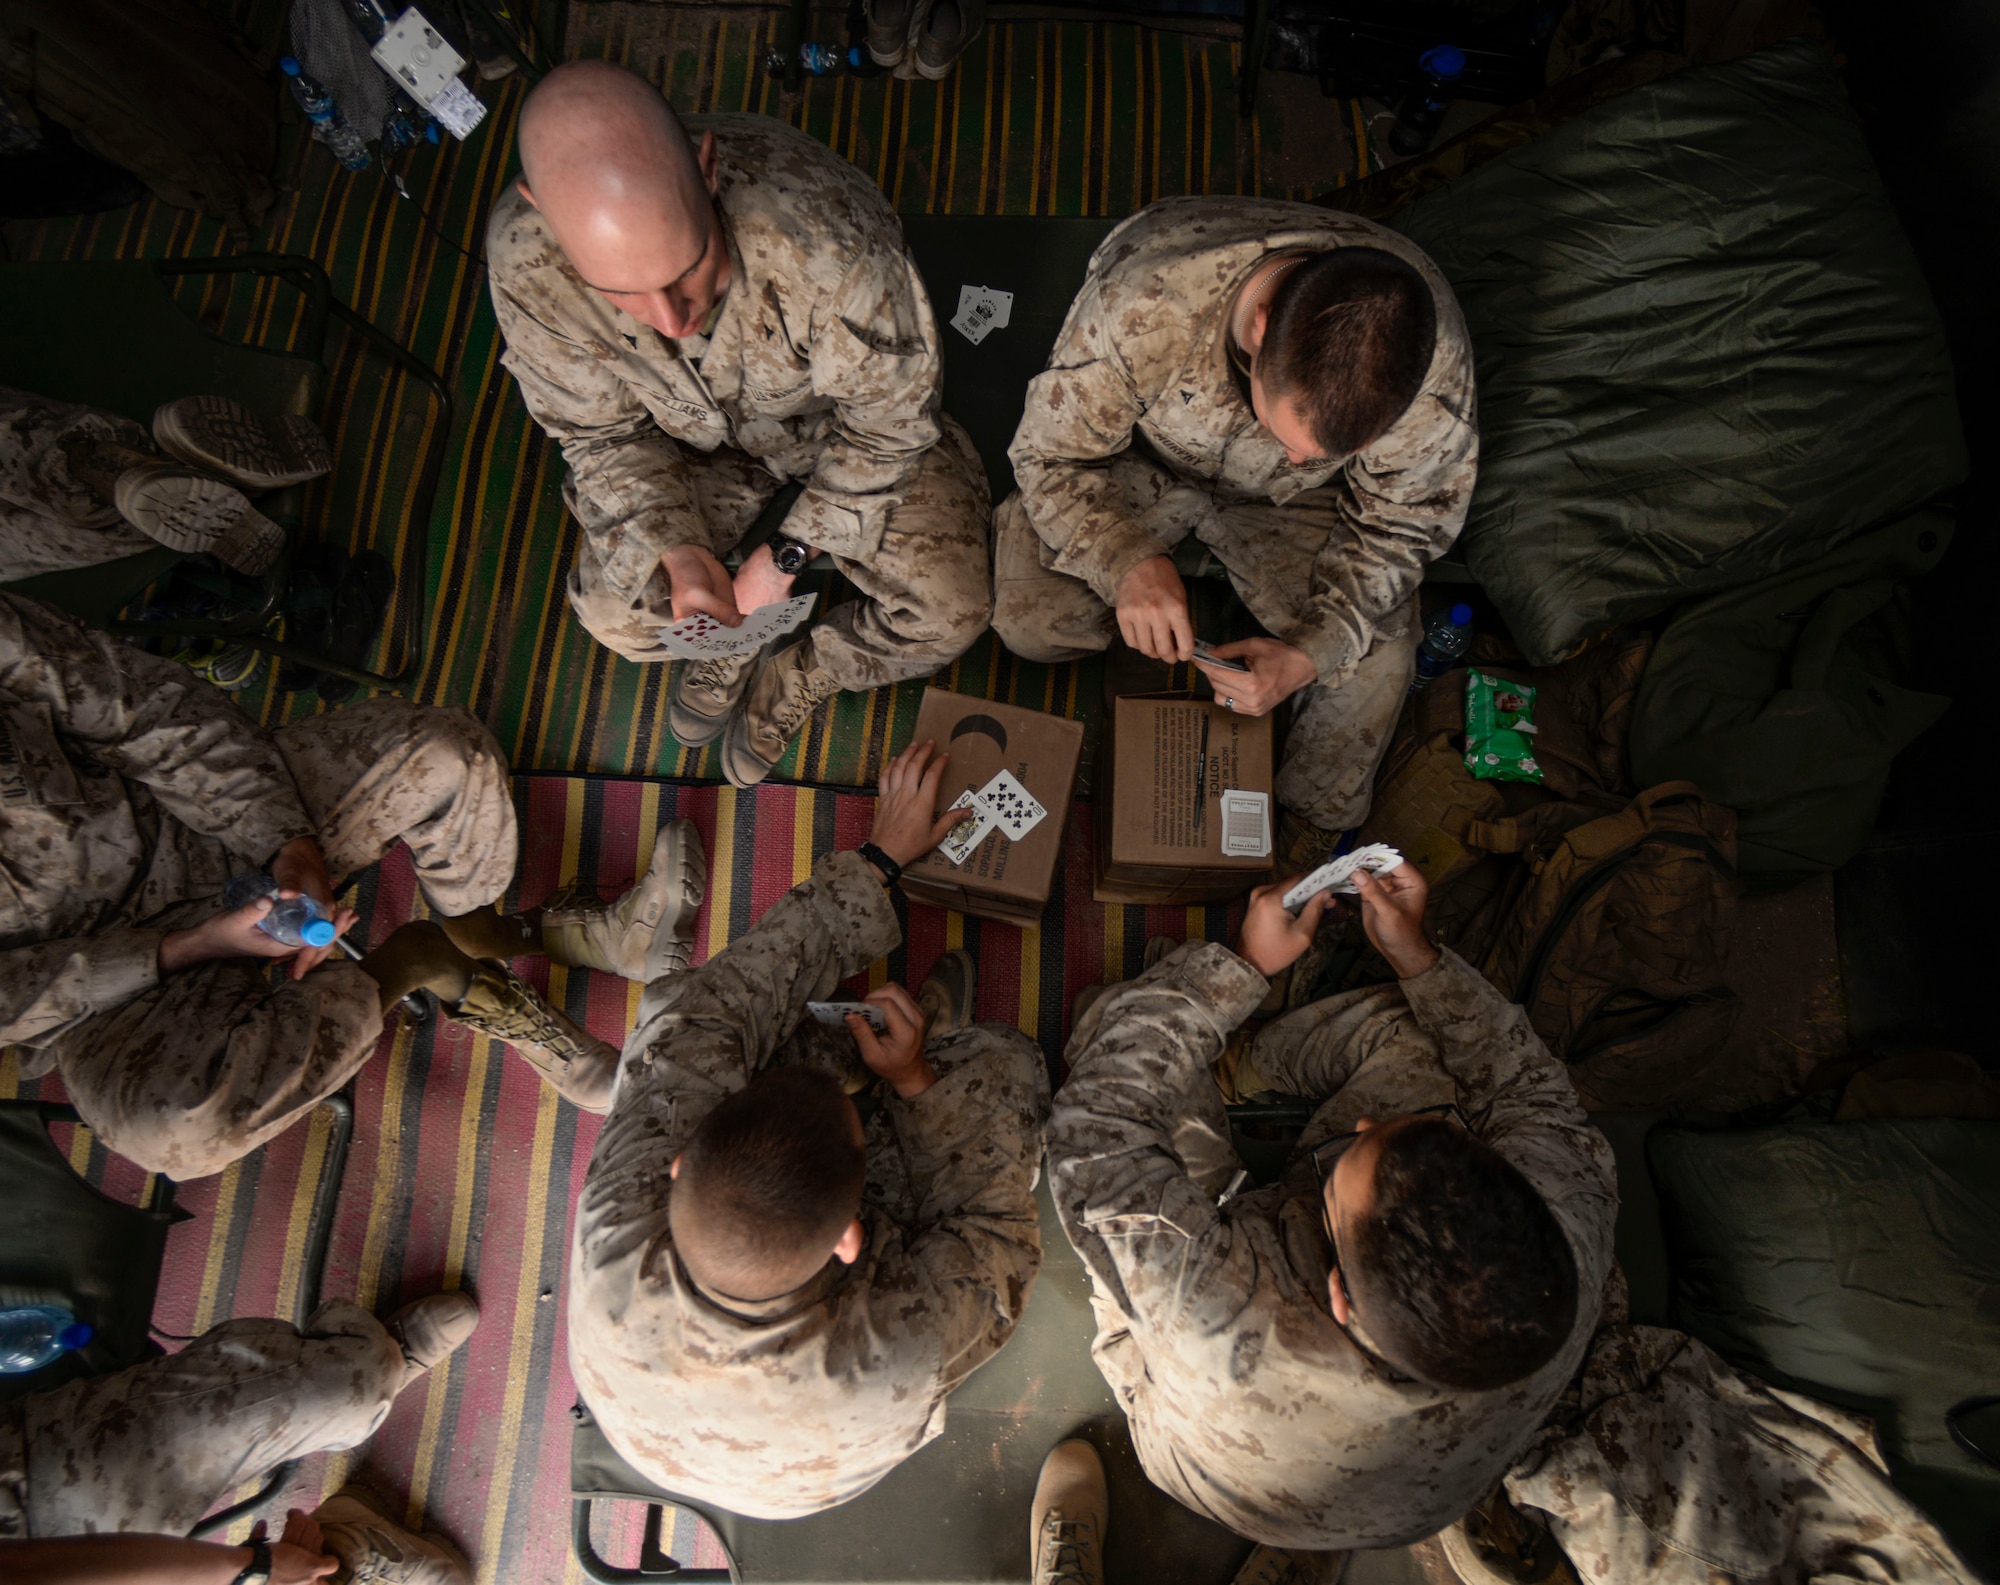 U.S. Marines from the 4th Law Enforcement Battalion play cards after a day of training during AFRICAN LION 16 at Tifnit, Kingdom of Morocco, April 23, 2016. The U.S. Marine Forces Europe-Africa and Kingdom of Morocco-led joint, exercise provided familiarization with various military techniques from 11 different countries and provided an opportunity to become more familiar with allied nations’ tactics to ease synchronization of effort. (U.S. Air Force photo by Senior Airman Krystal Ardrey/Released)